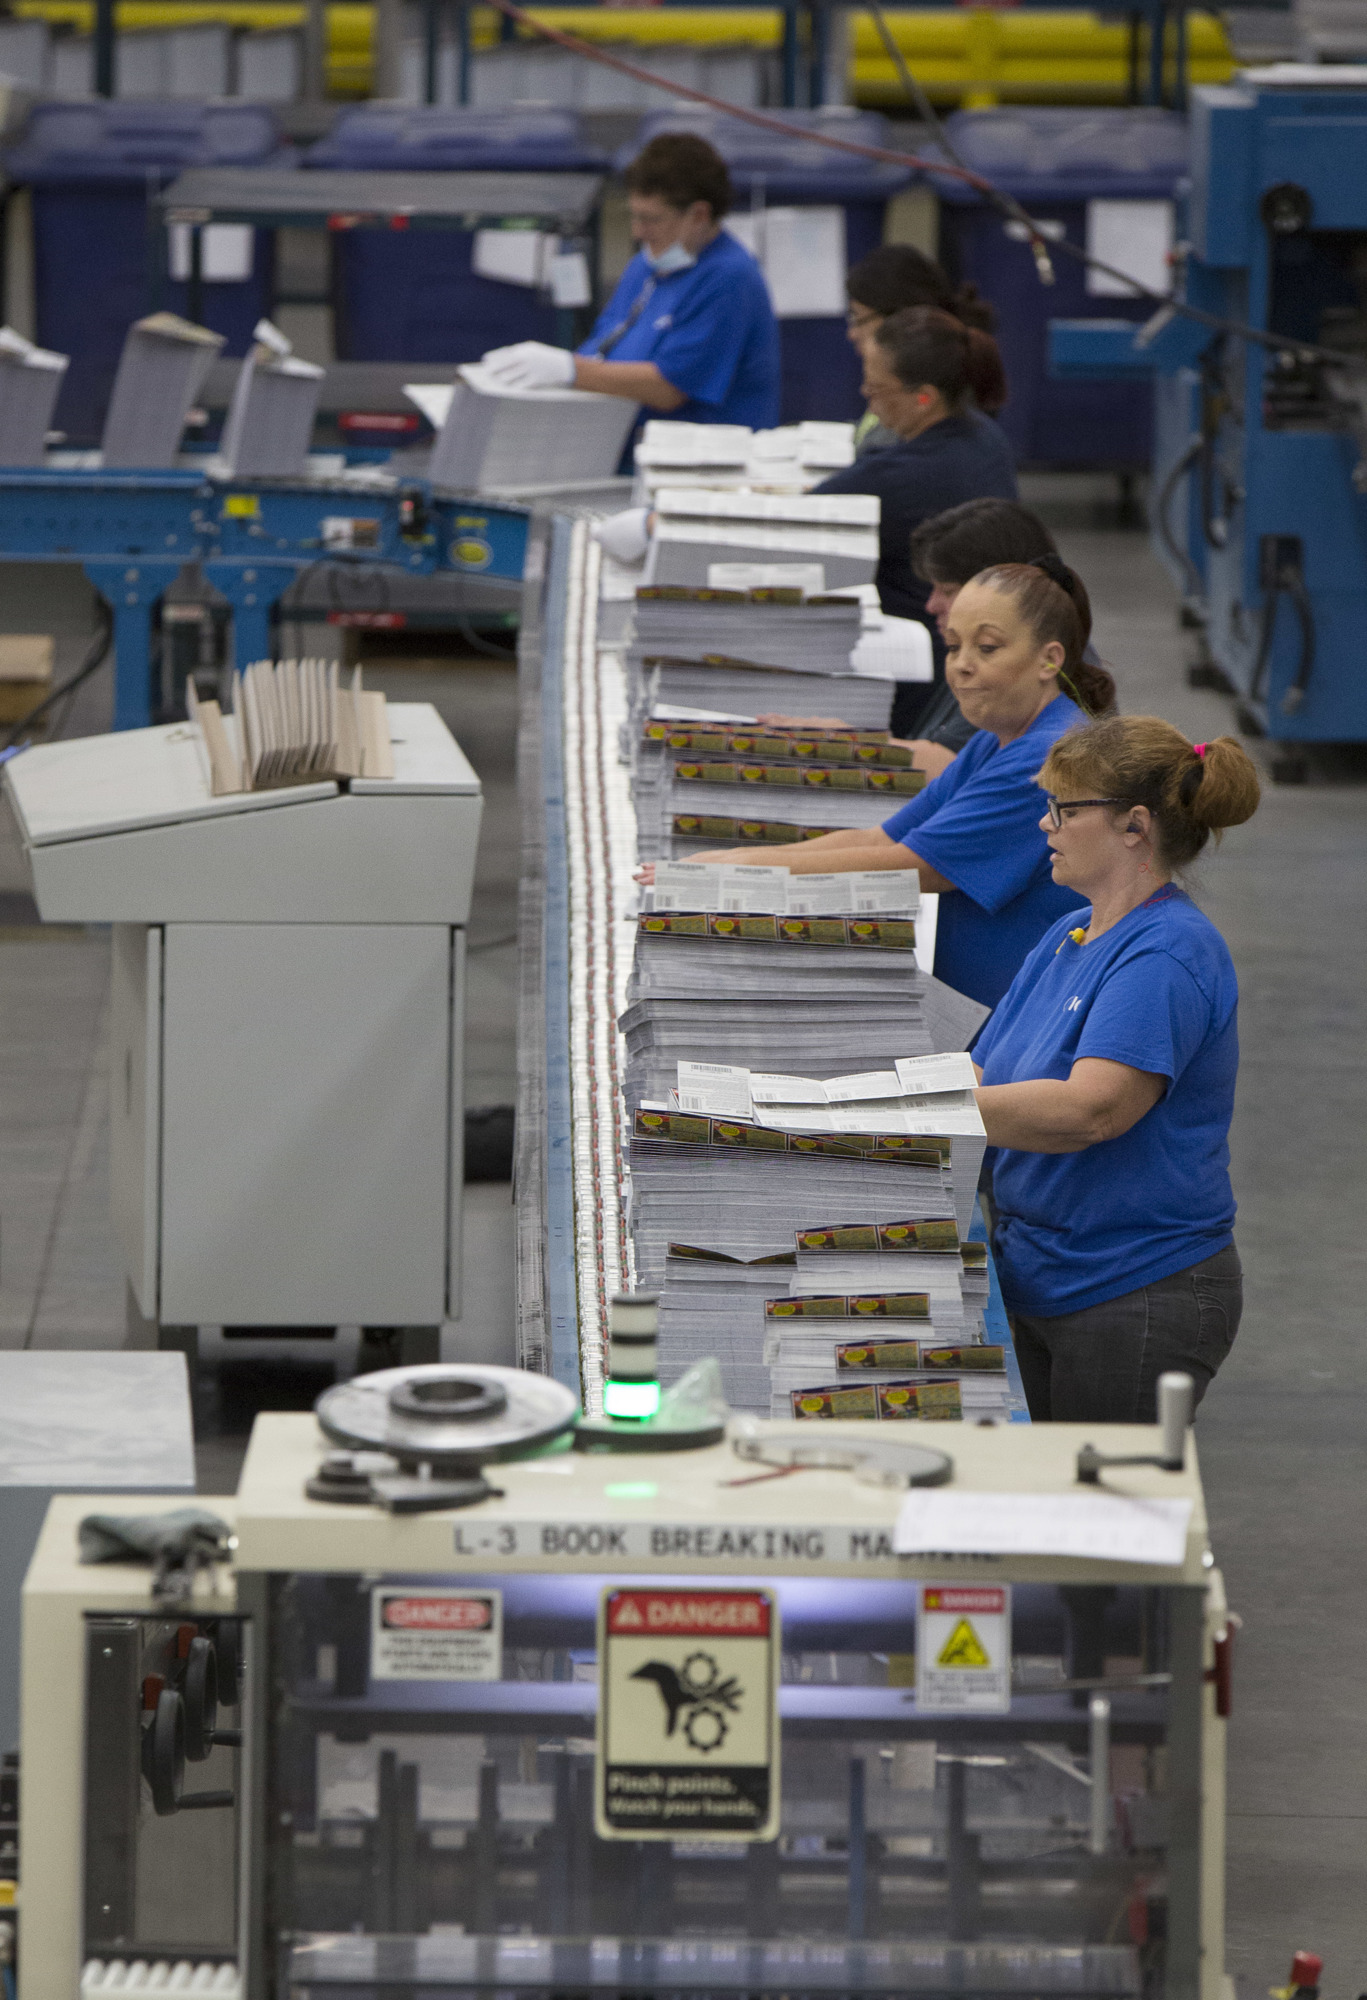 Founded as IGT’s global Instant Ticket Services center in 2009, the Lakeland plant’s workforce has since doubled to about 300 full-time employees. 